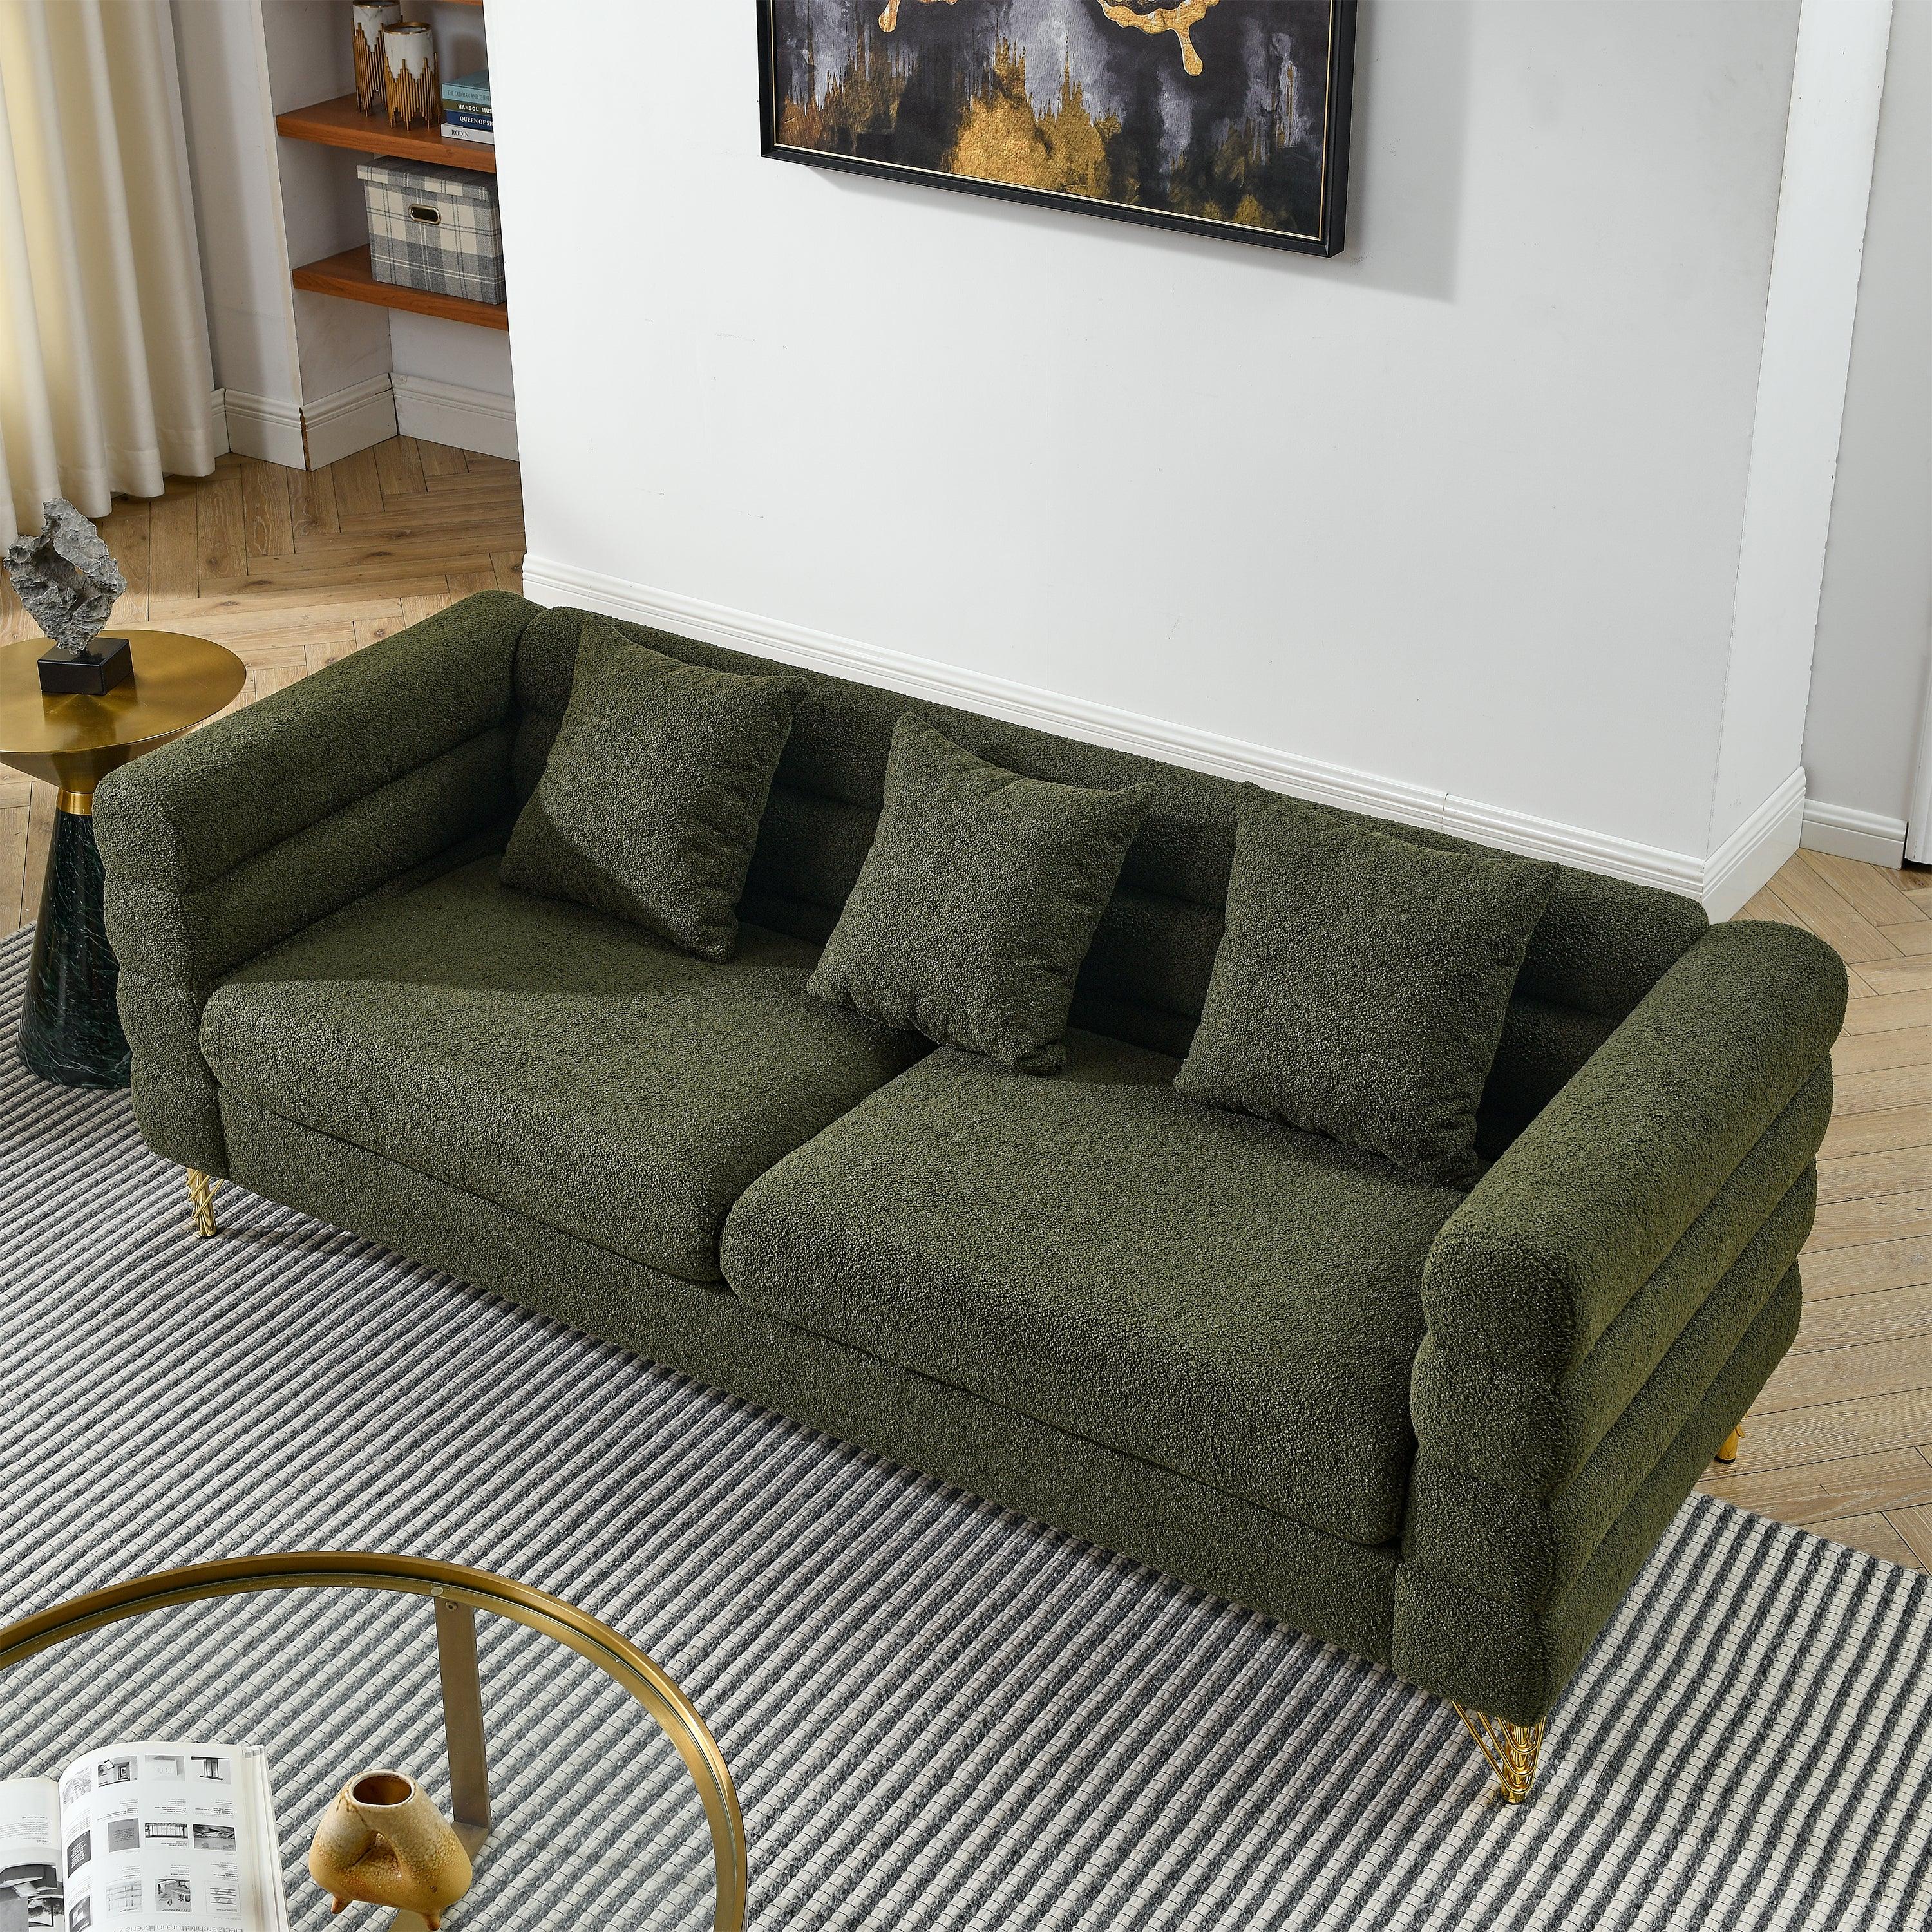 🆓🚛 81" Oversized 3 Seater Sectional Sofa, Living Room Comfort Fabric Sectional Sofa - Deep Seating Sectional Sofa, Soft Sitting With 3 Pillows for Living Room, Bedroom, Office, Green Teddy